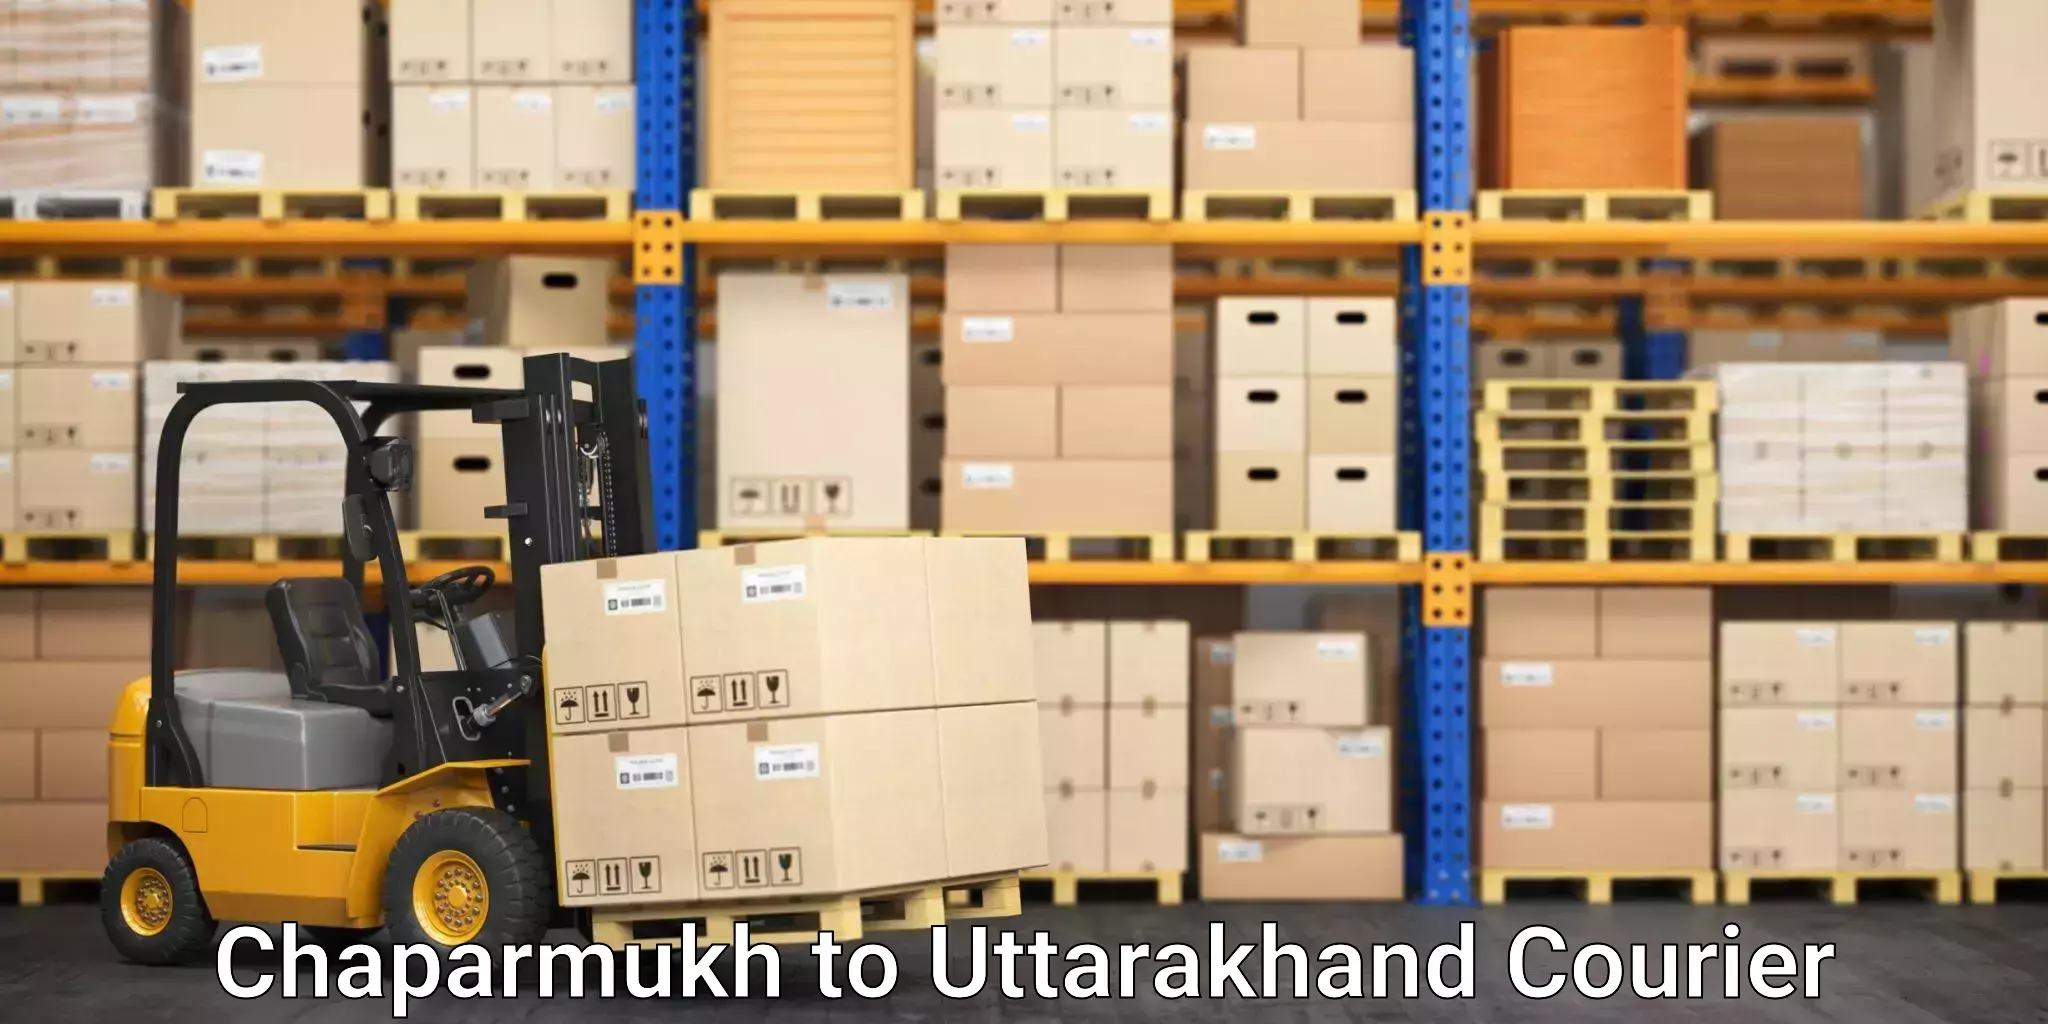 Customer-centric shipping Chaparmukh to IIT Roorkee